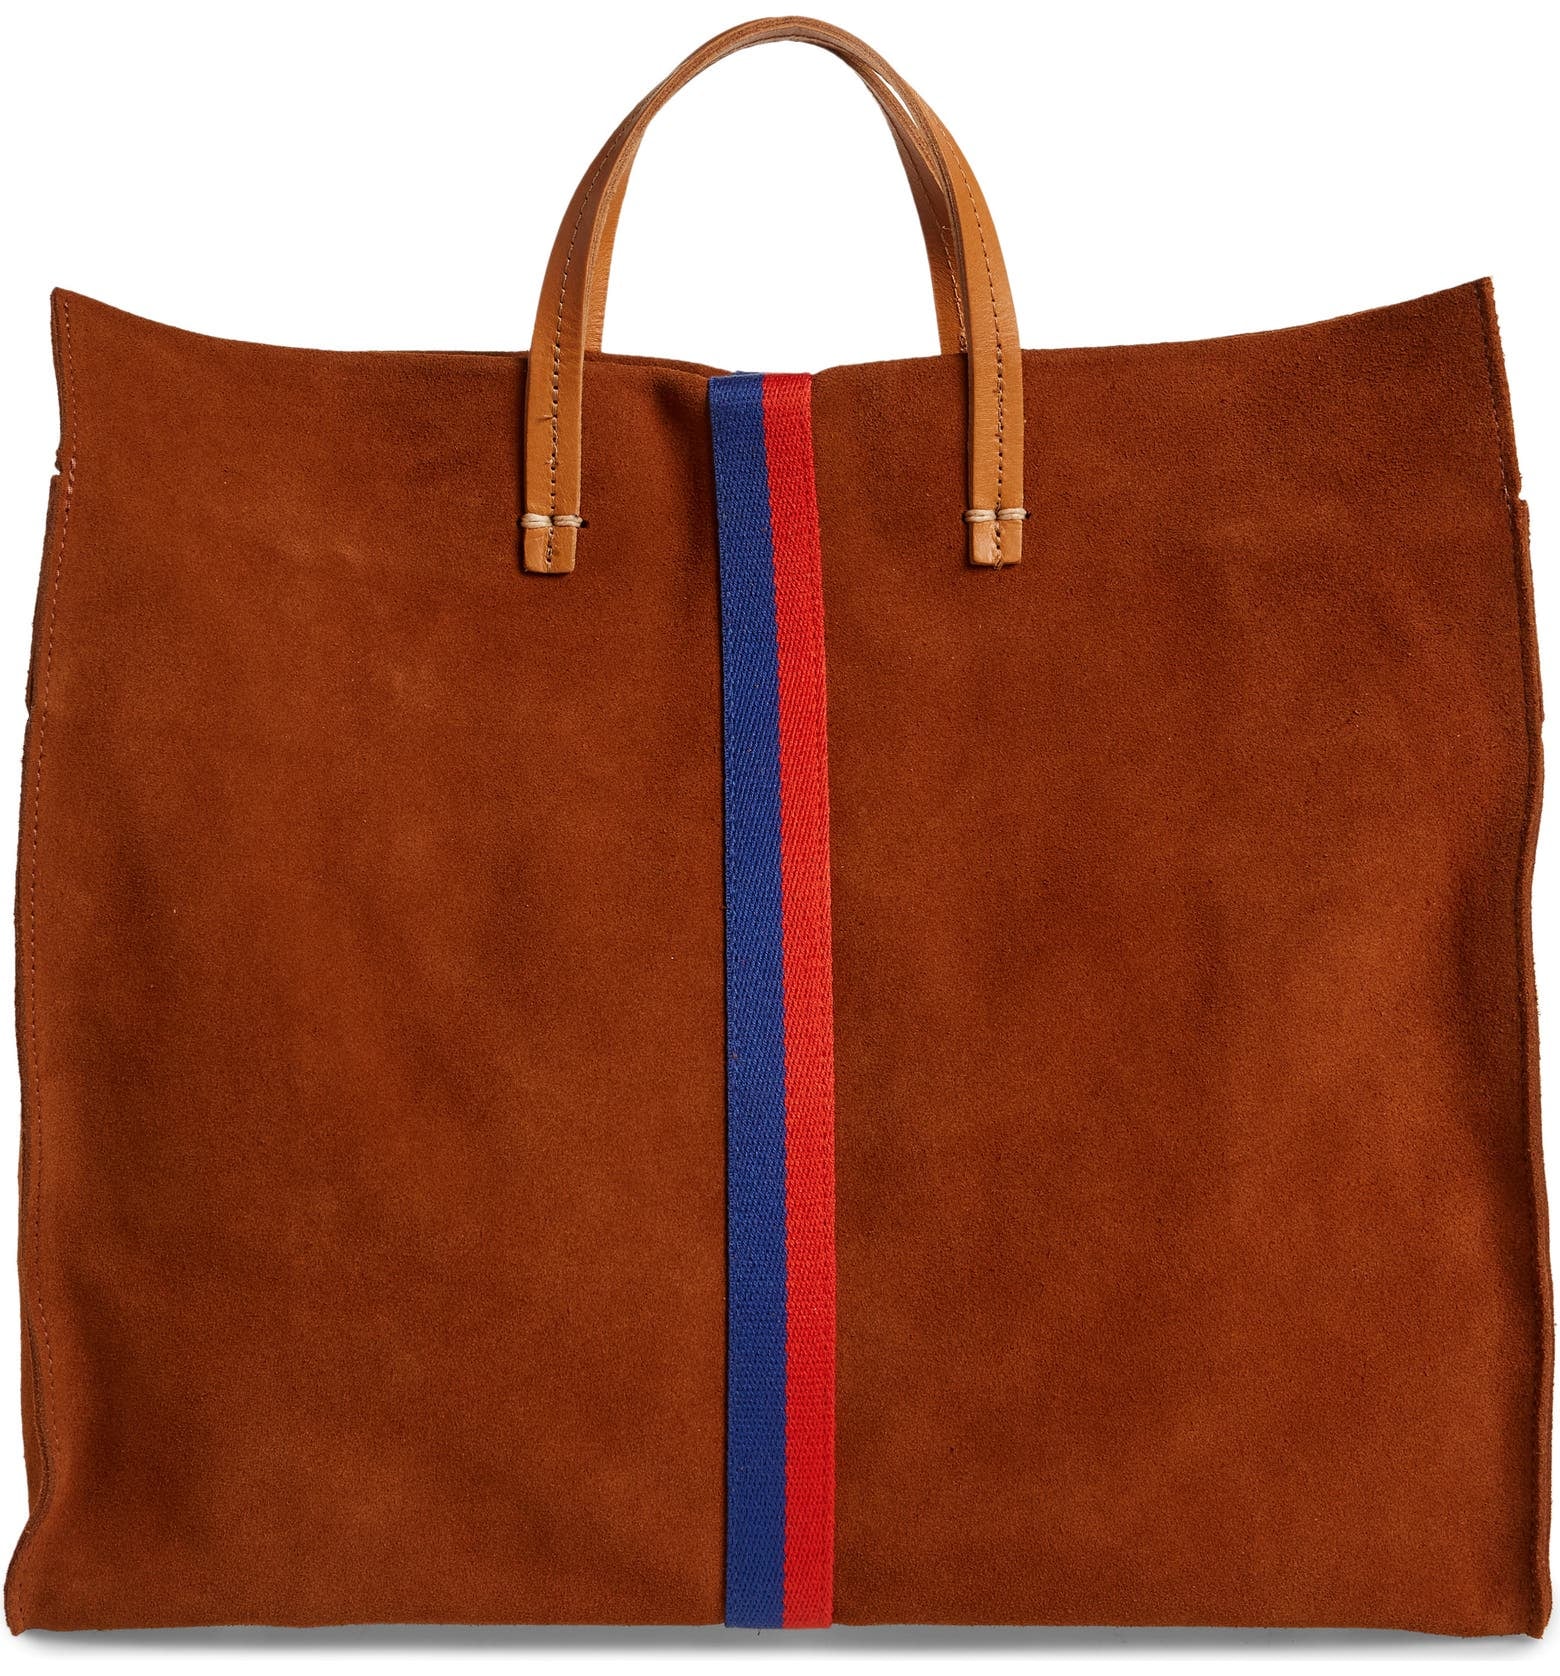 Clare V. Summer Simple Tote